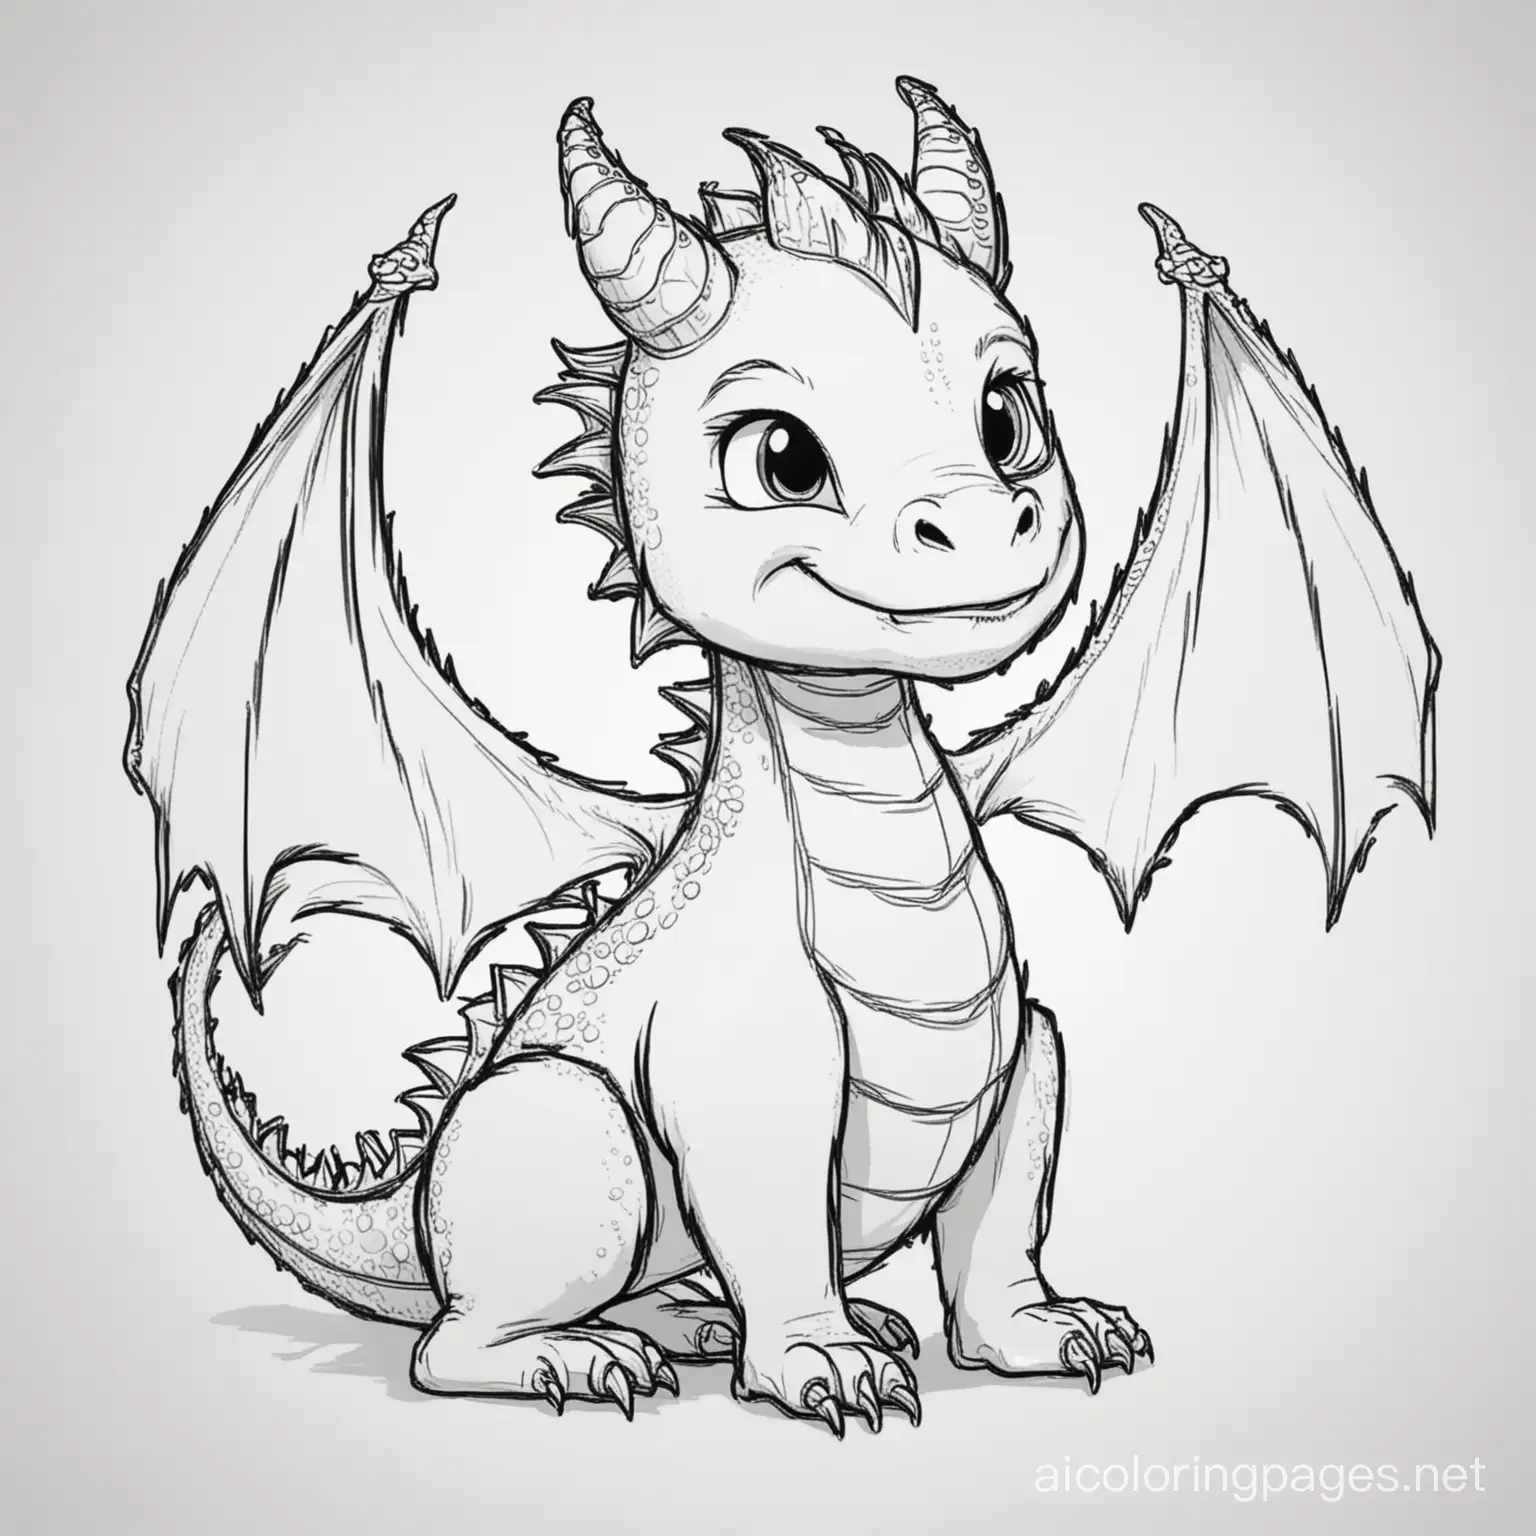 Dragon-Coloring-Page-Simple-Line-Art-on-White-Background